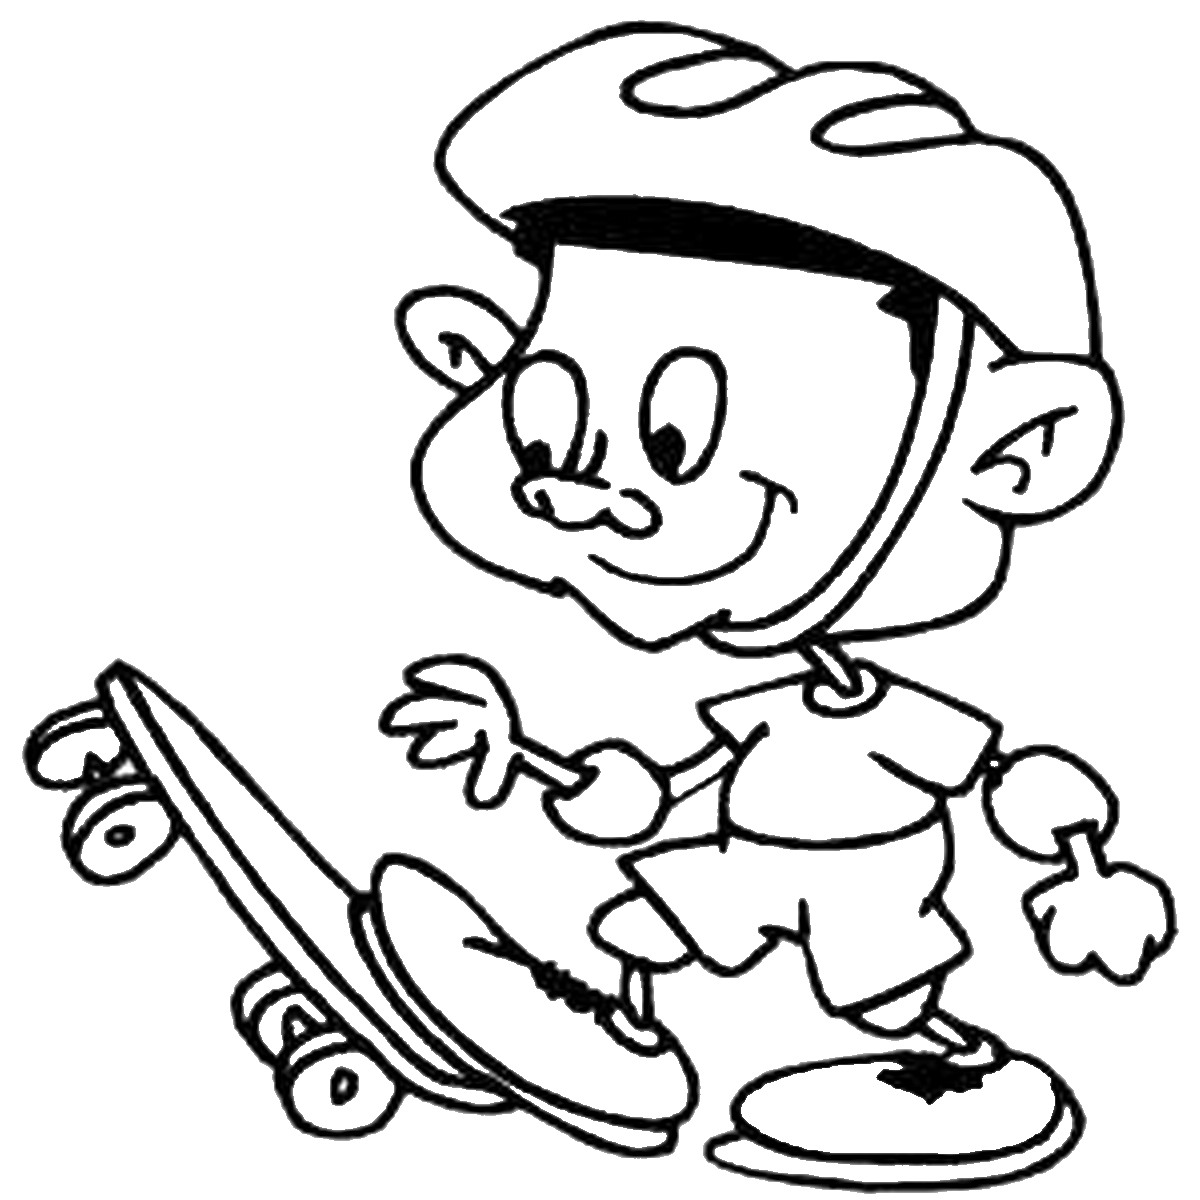 Skateboarding Coloring Pages - Best Coloring Pages For Kids